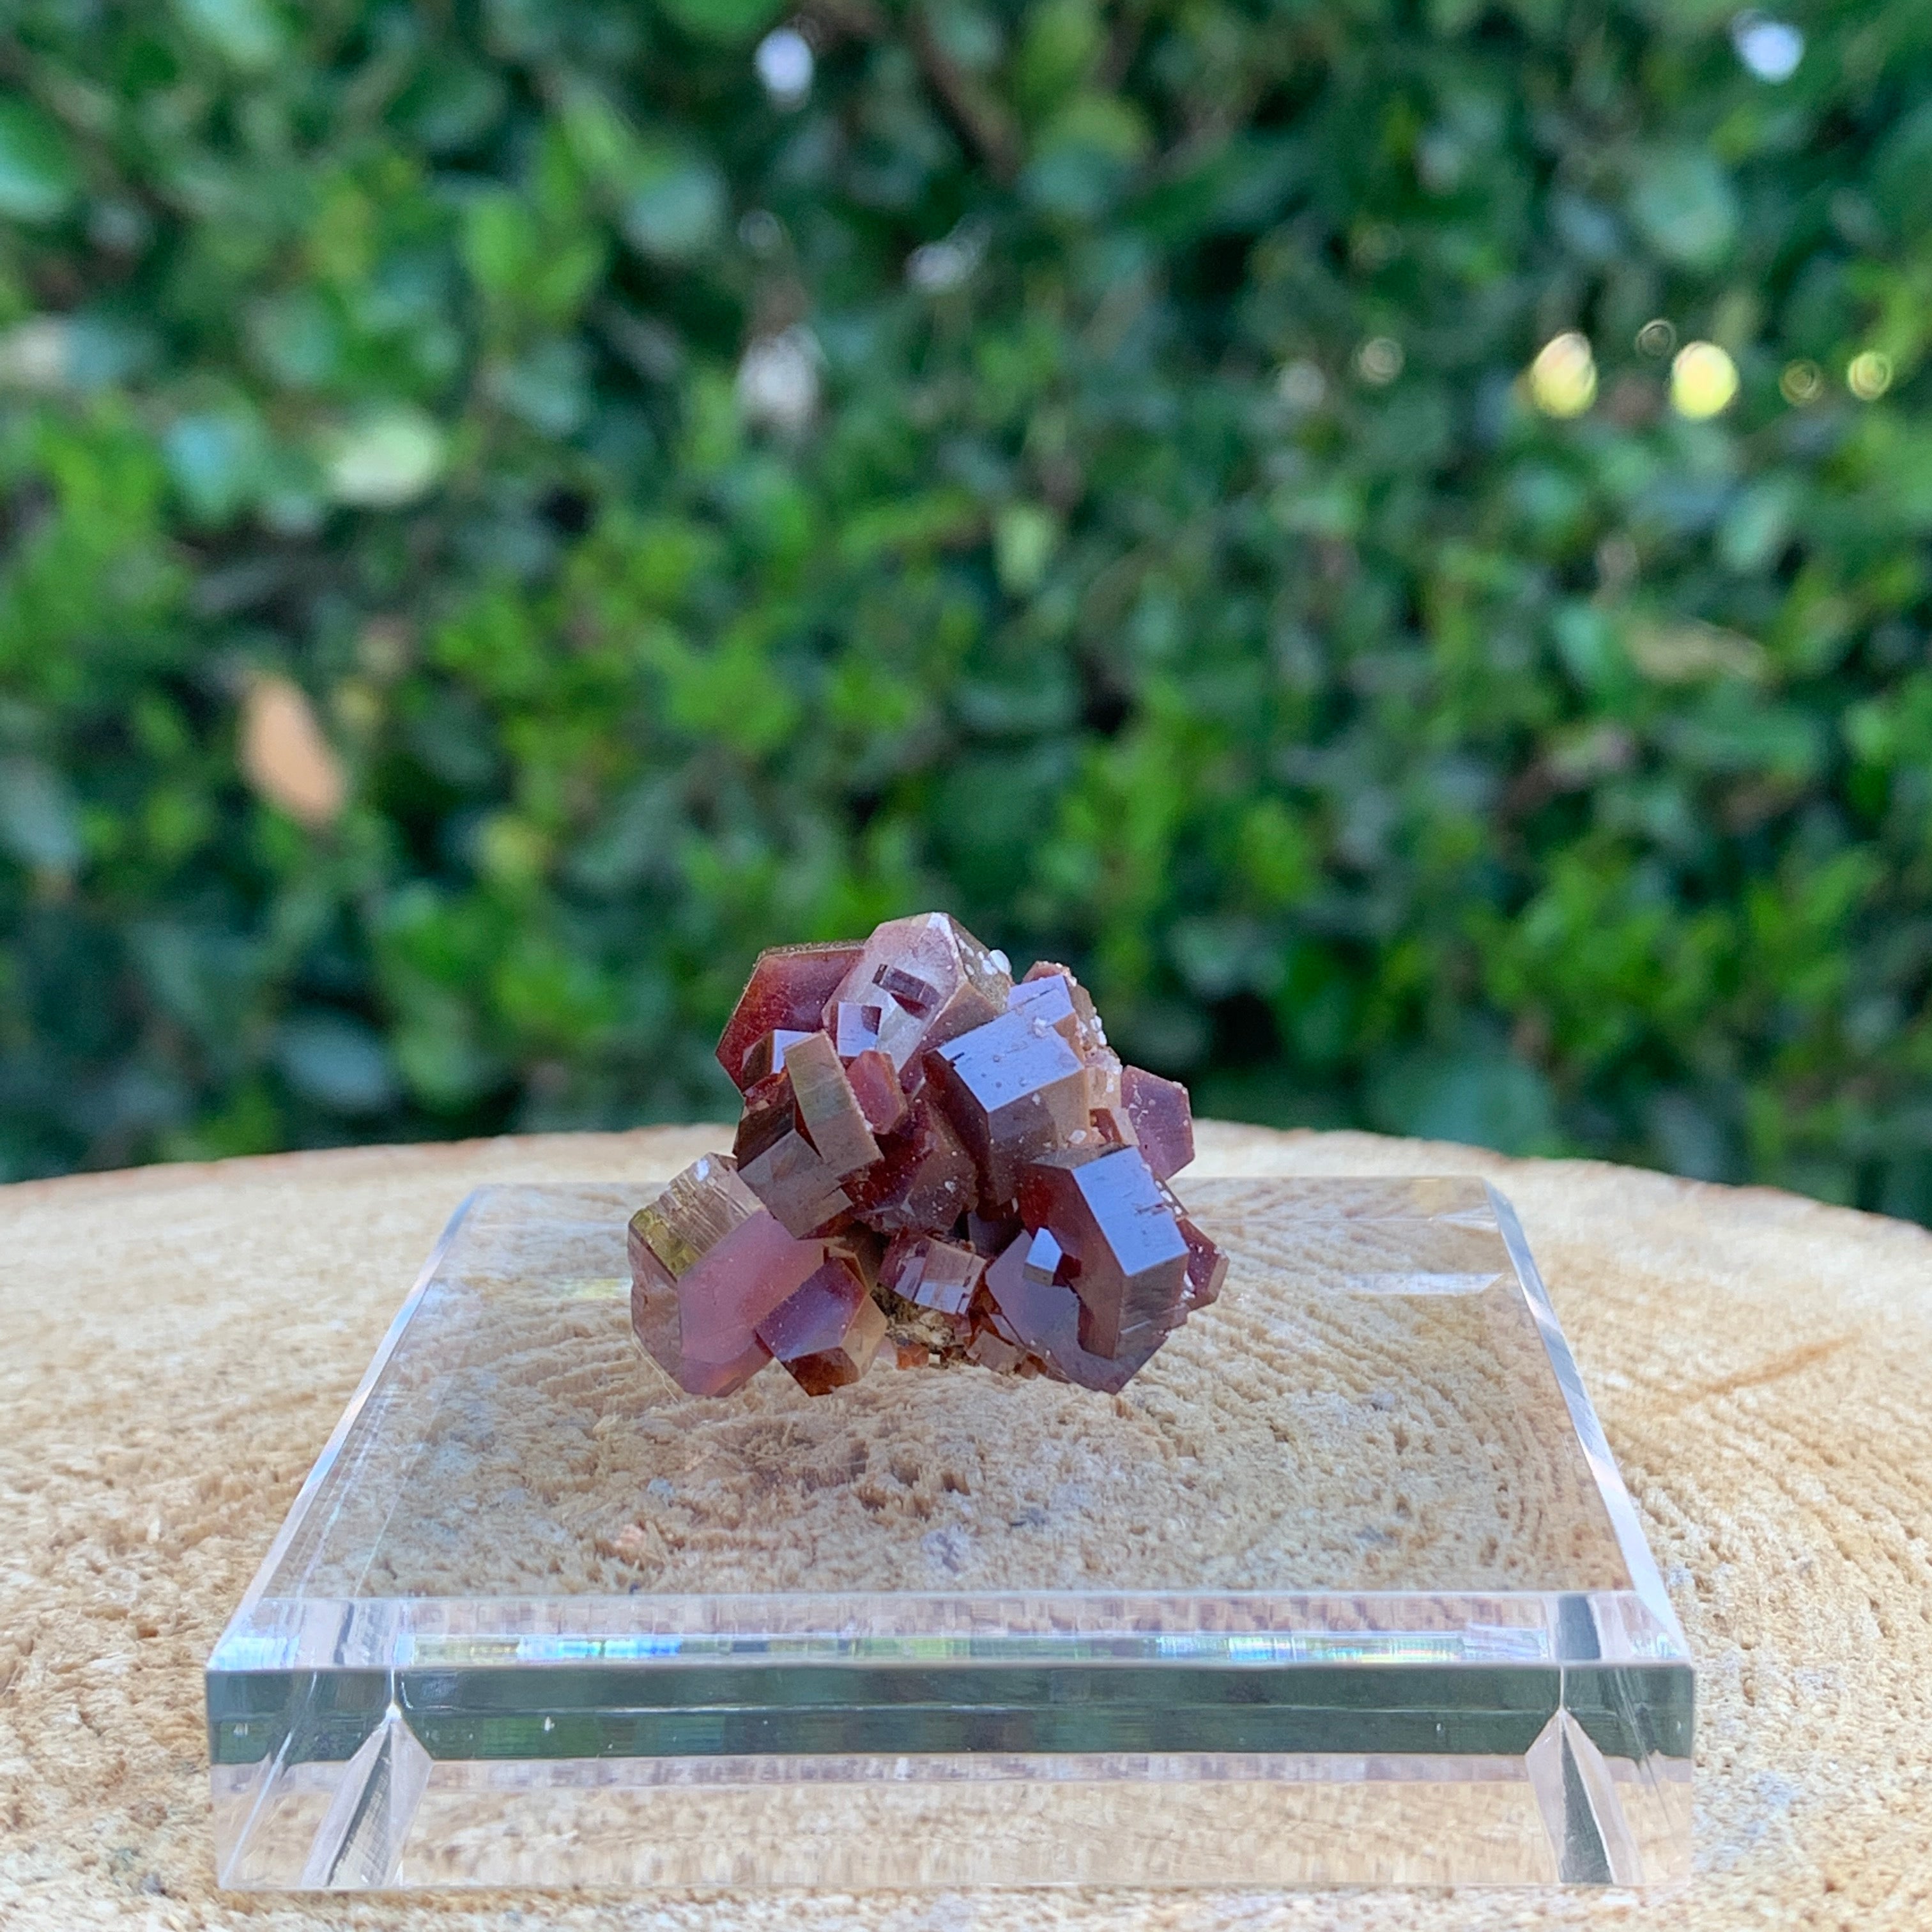 25g 3x3x2cm Red Vanadinite Nugget from Morocco